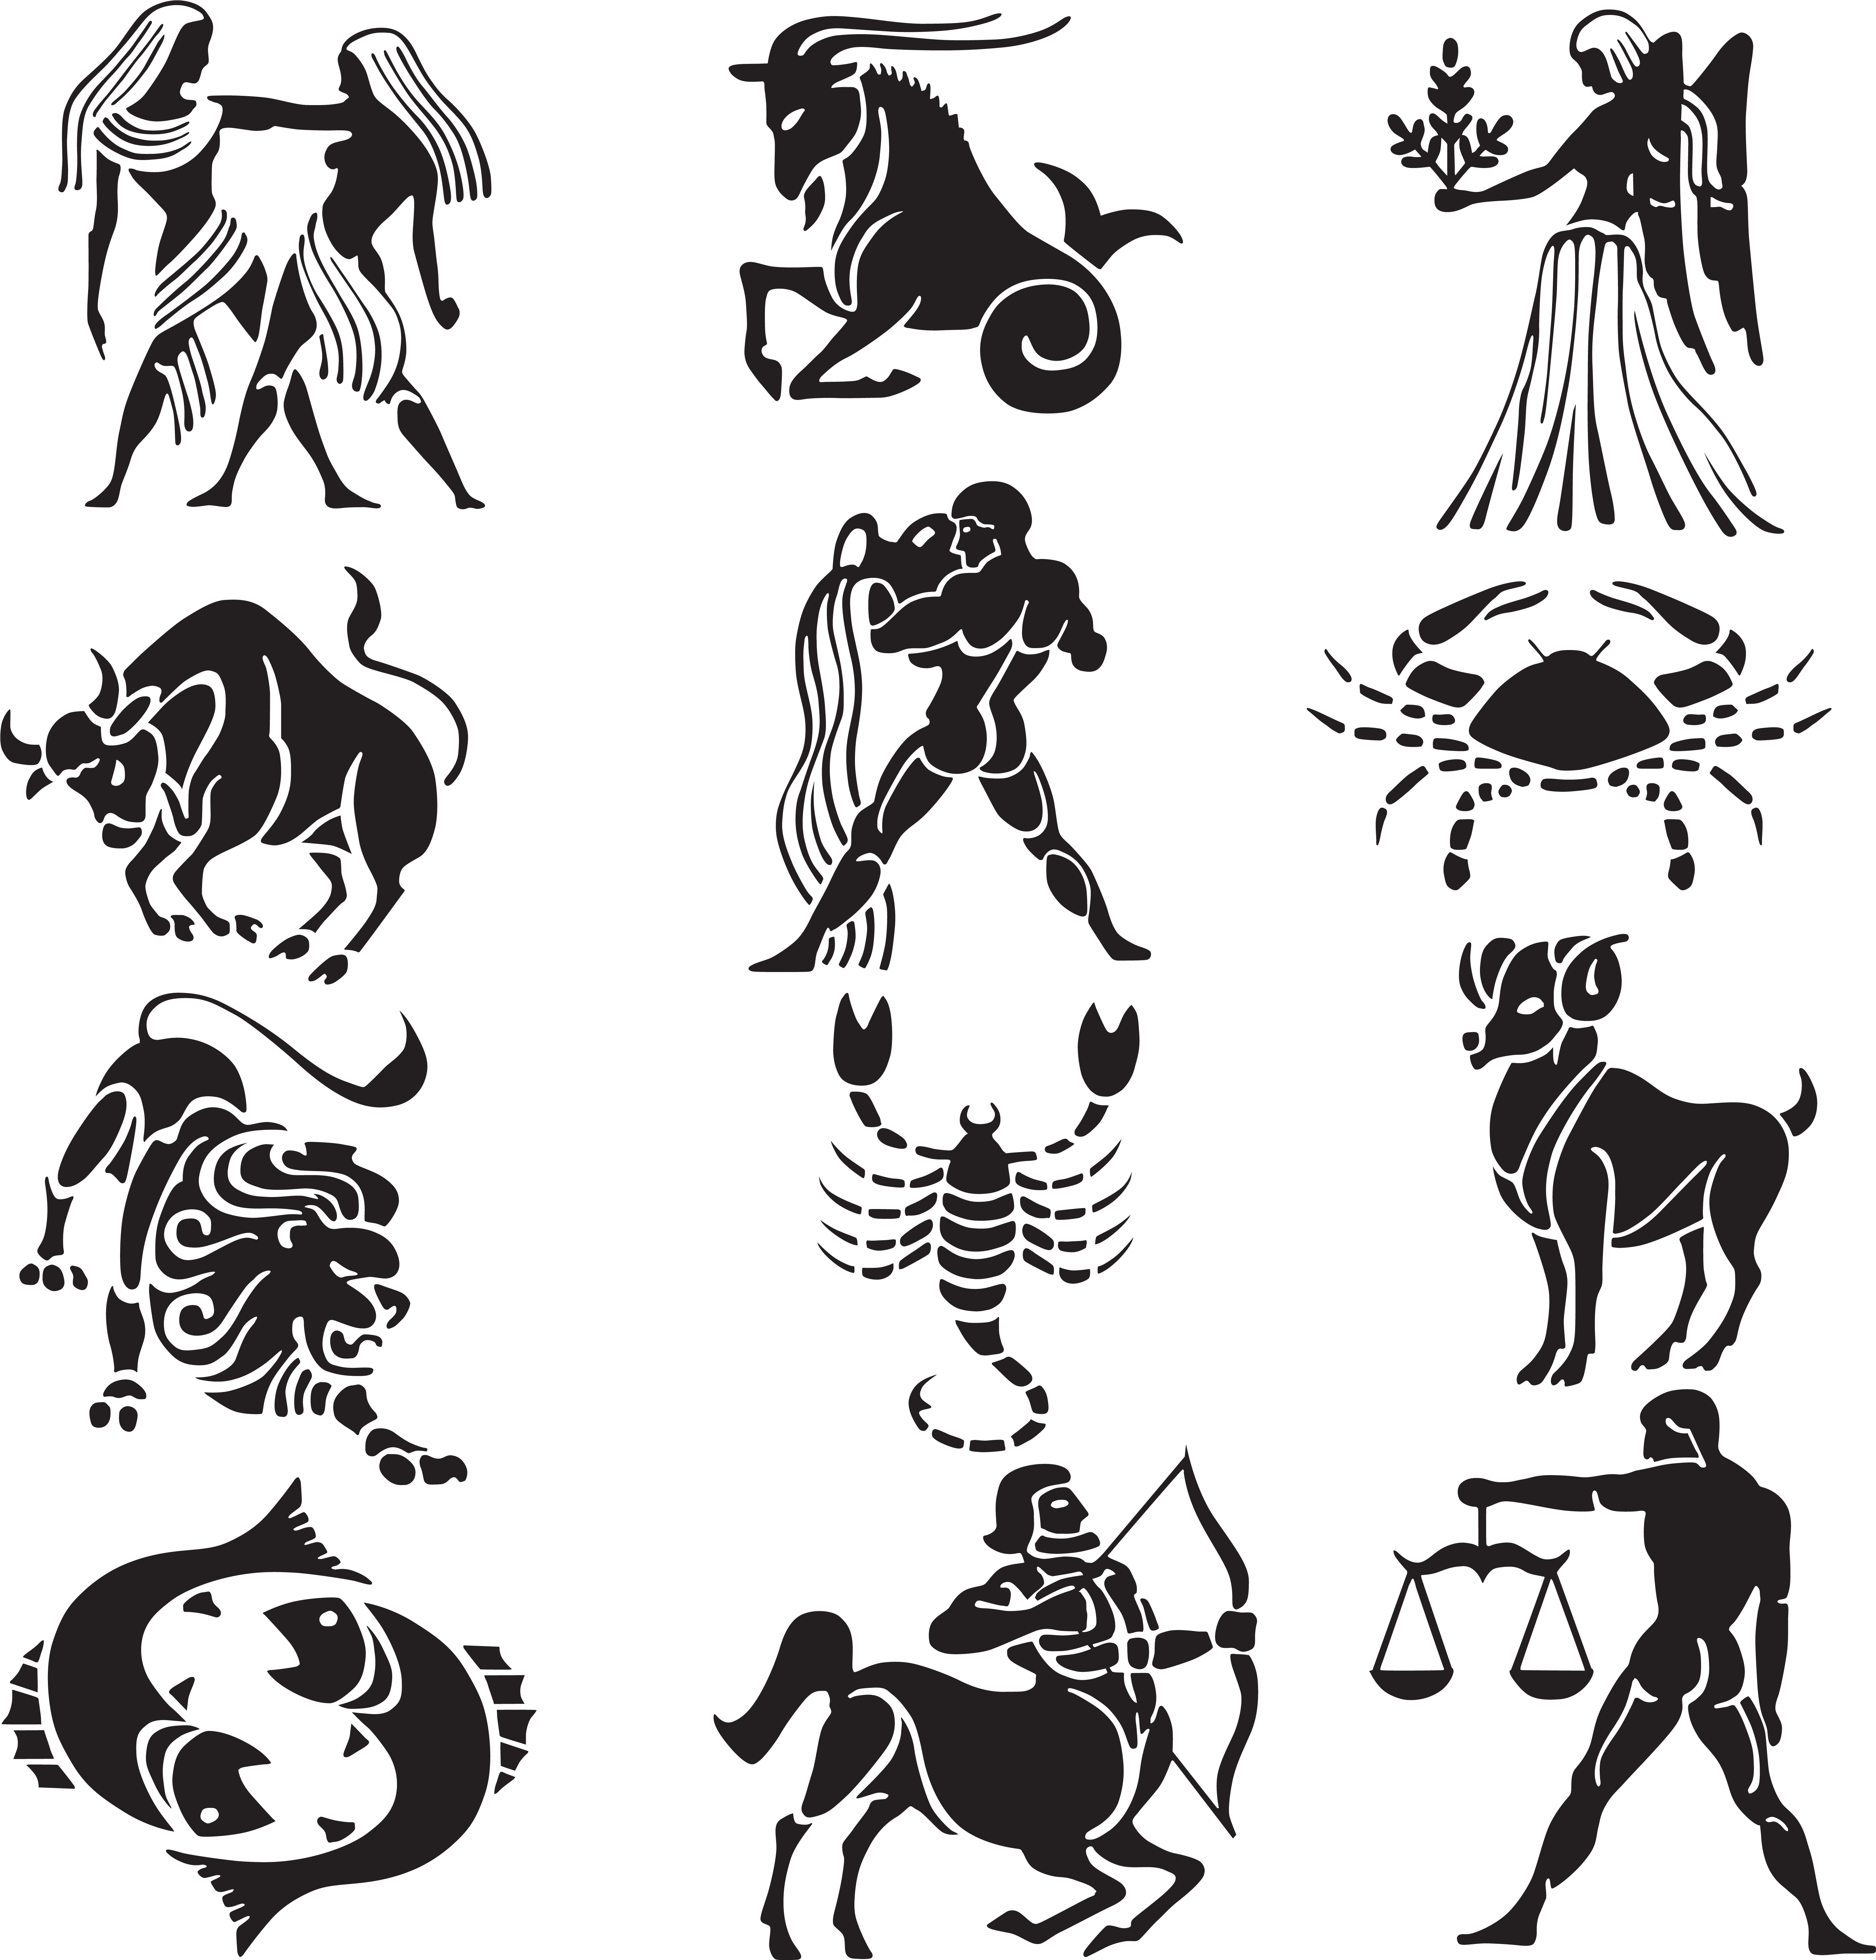 A Black And White Image Of Zodiac Signs